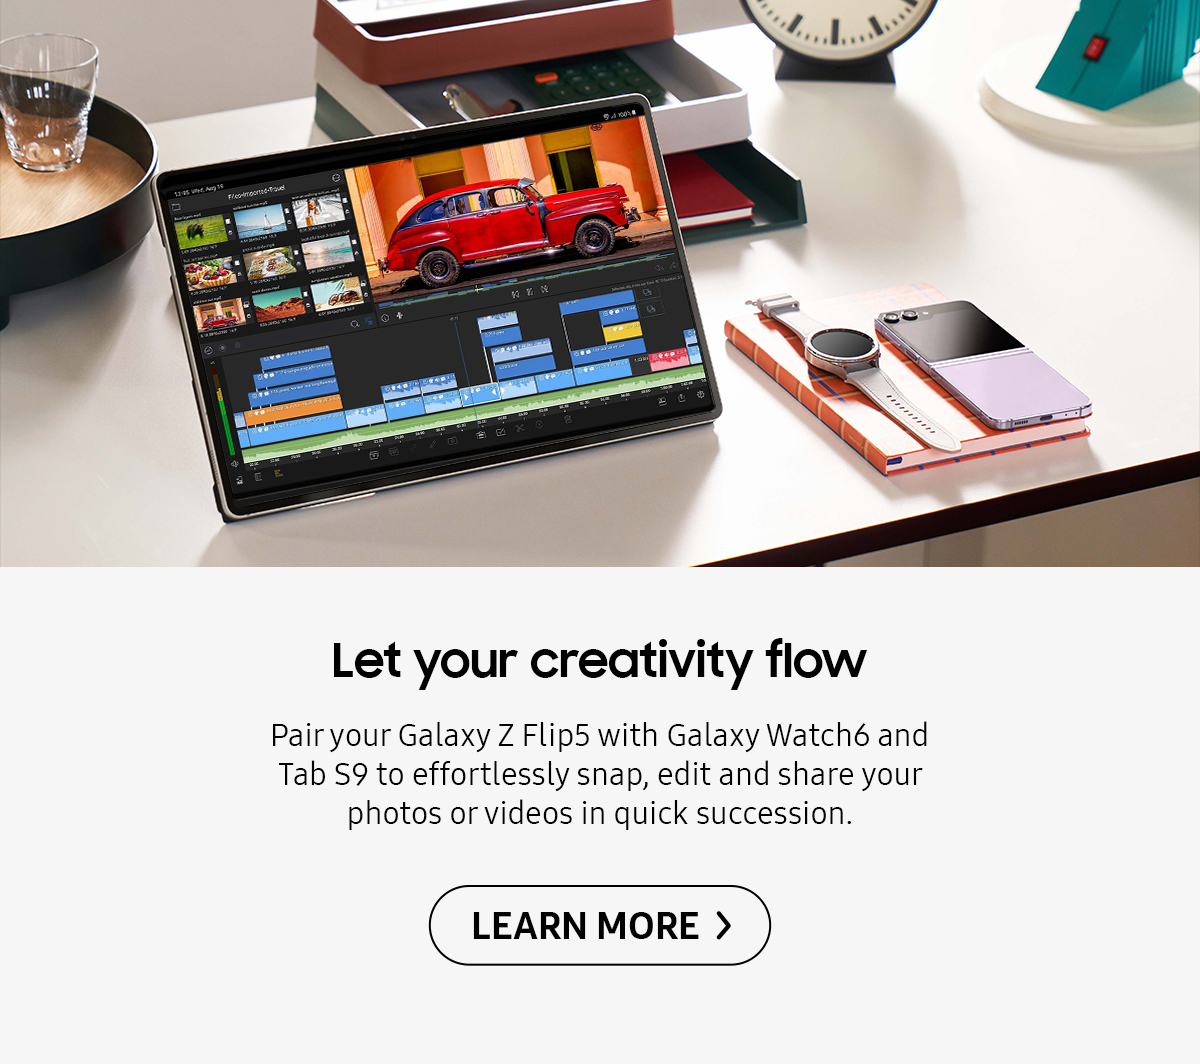 Let your creativity flow | Pair your Galaxy Z Flip5 with Galaxy Watch6 and Tab S9 to effortlessly snap, edit and share your photos or videos in quick succession. Click here to learn more!